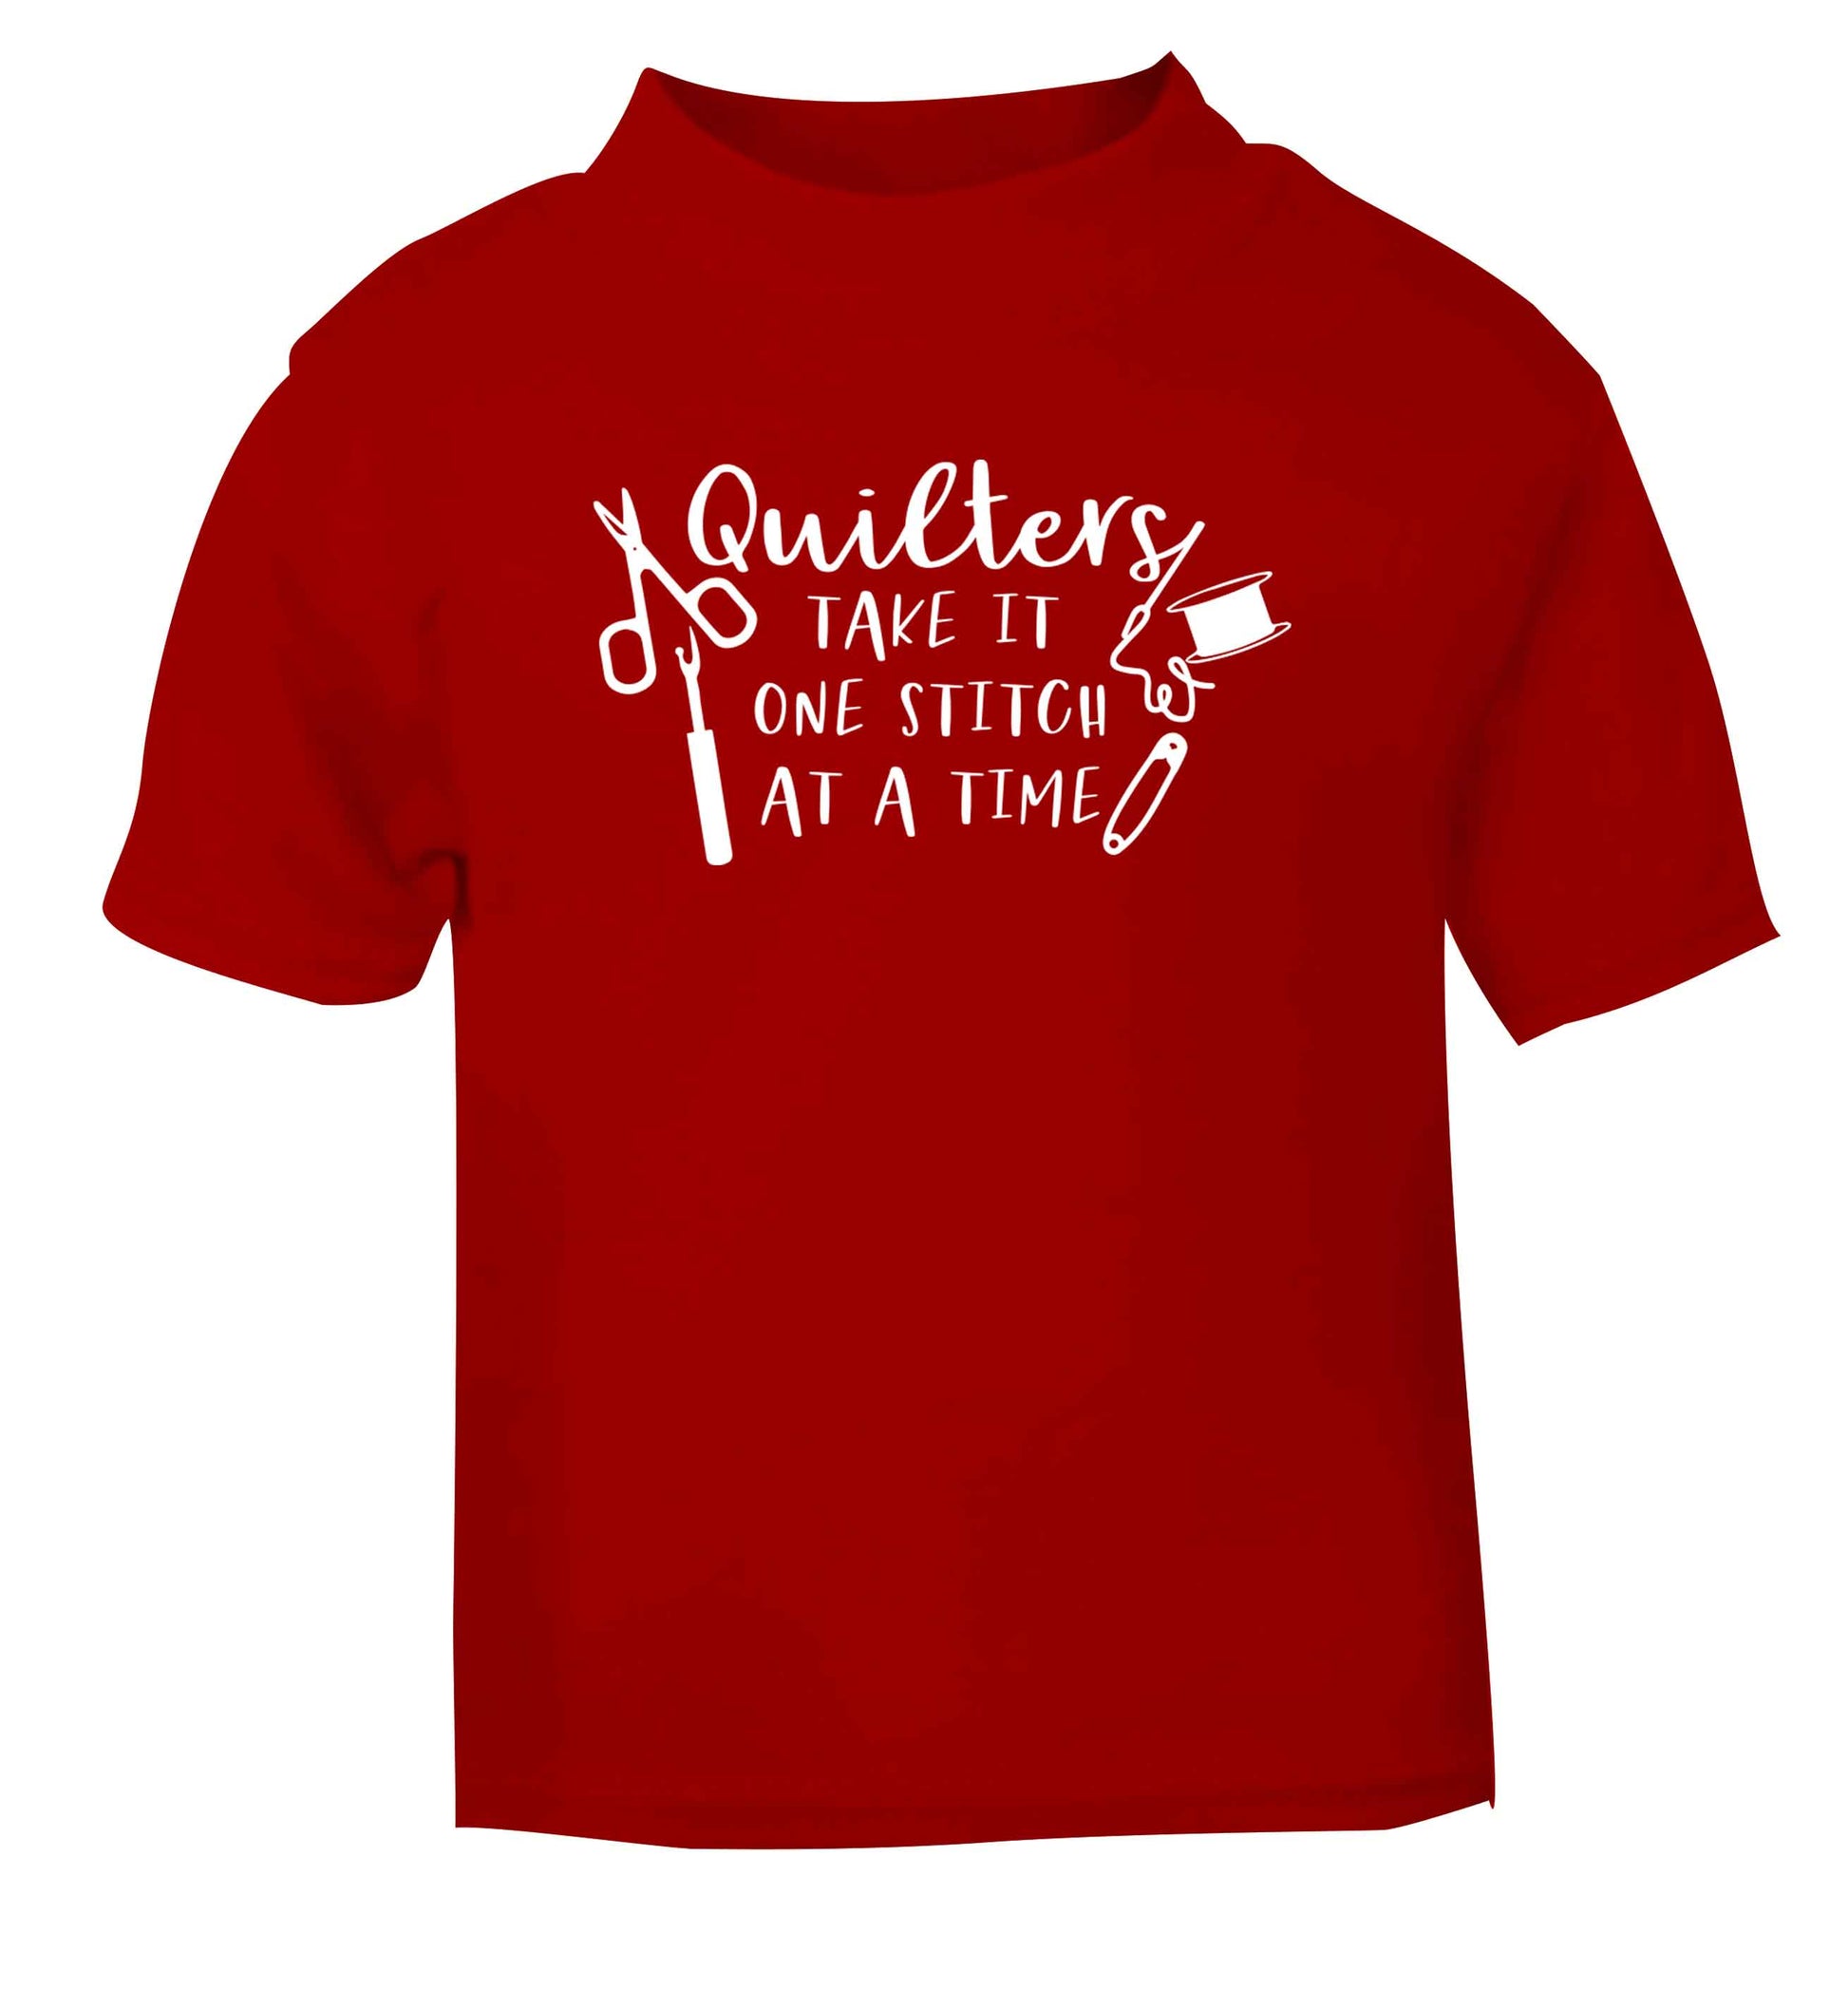 Quilters take it one stitch at a time  red Baby Toddler Tshirt 2 Years